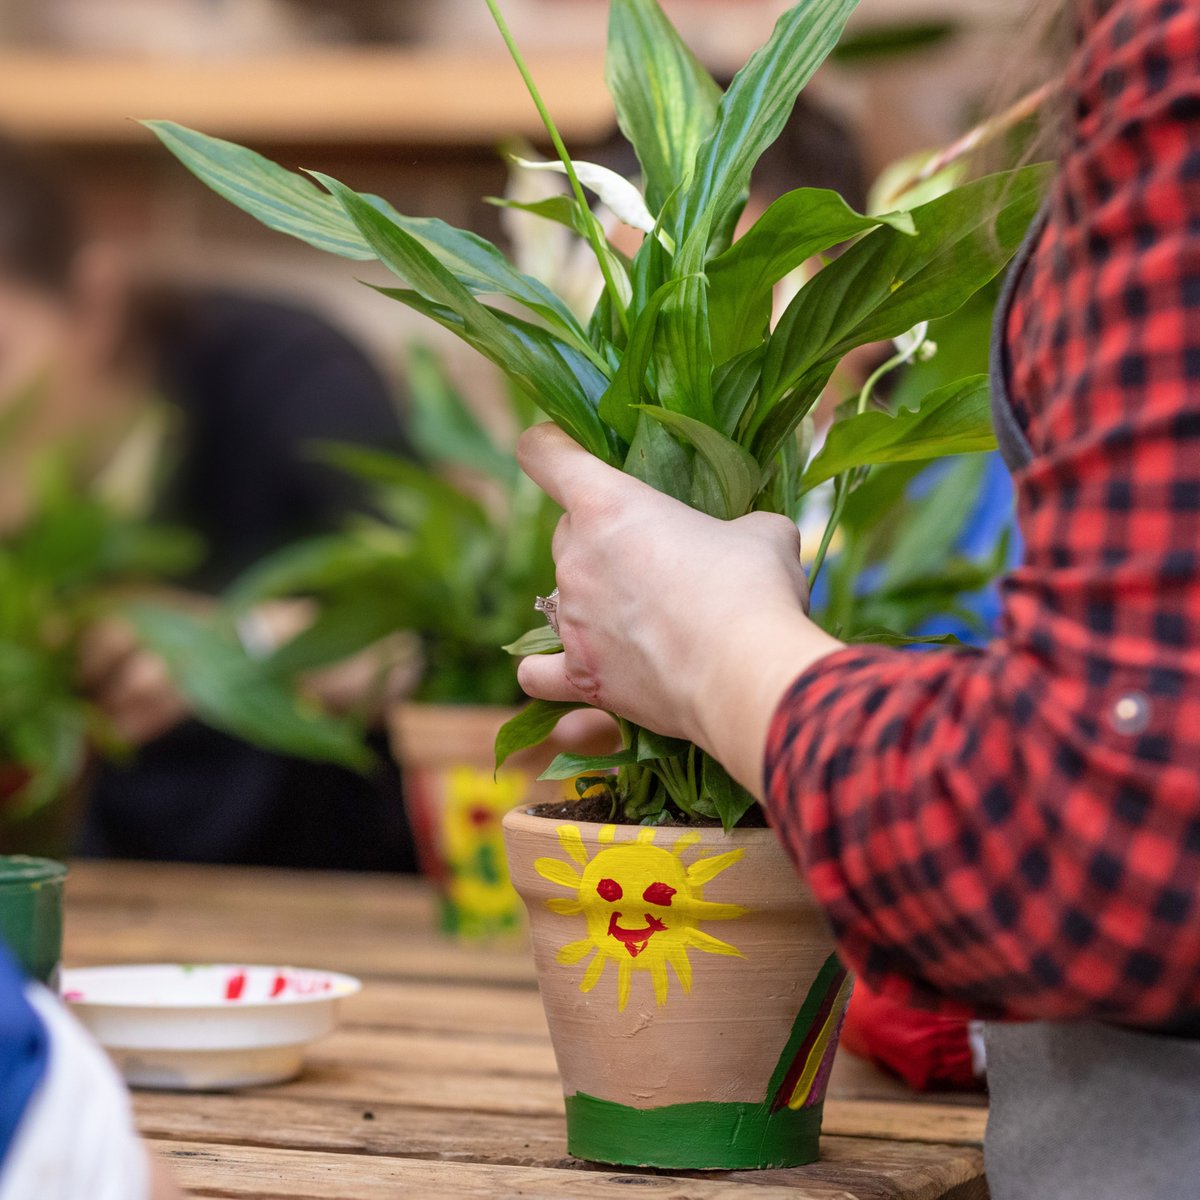 Join us tomorrow, Wednesday 28th June at 11am, for another #GIAG Plant and Paint session. 🪴 Bring along a plant pot, jar or container and get creative with paint pens then plant it up! Book now: bit.ly/42kZhN3